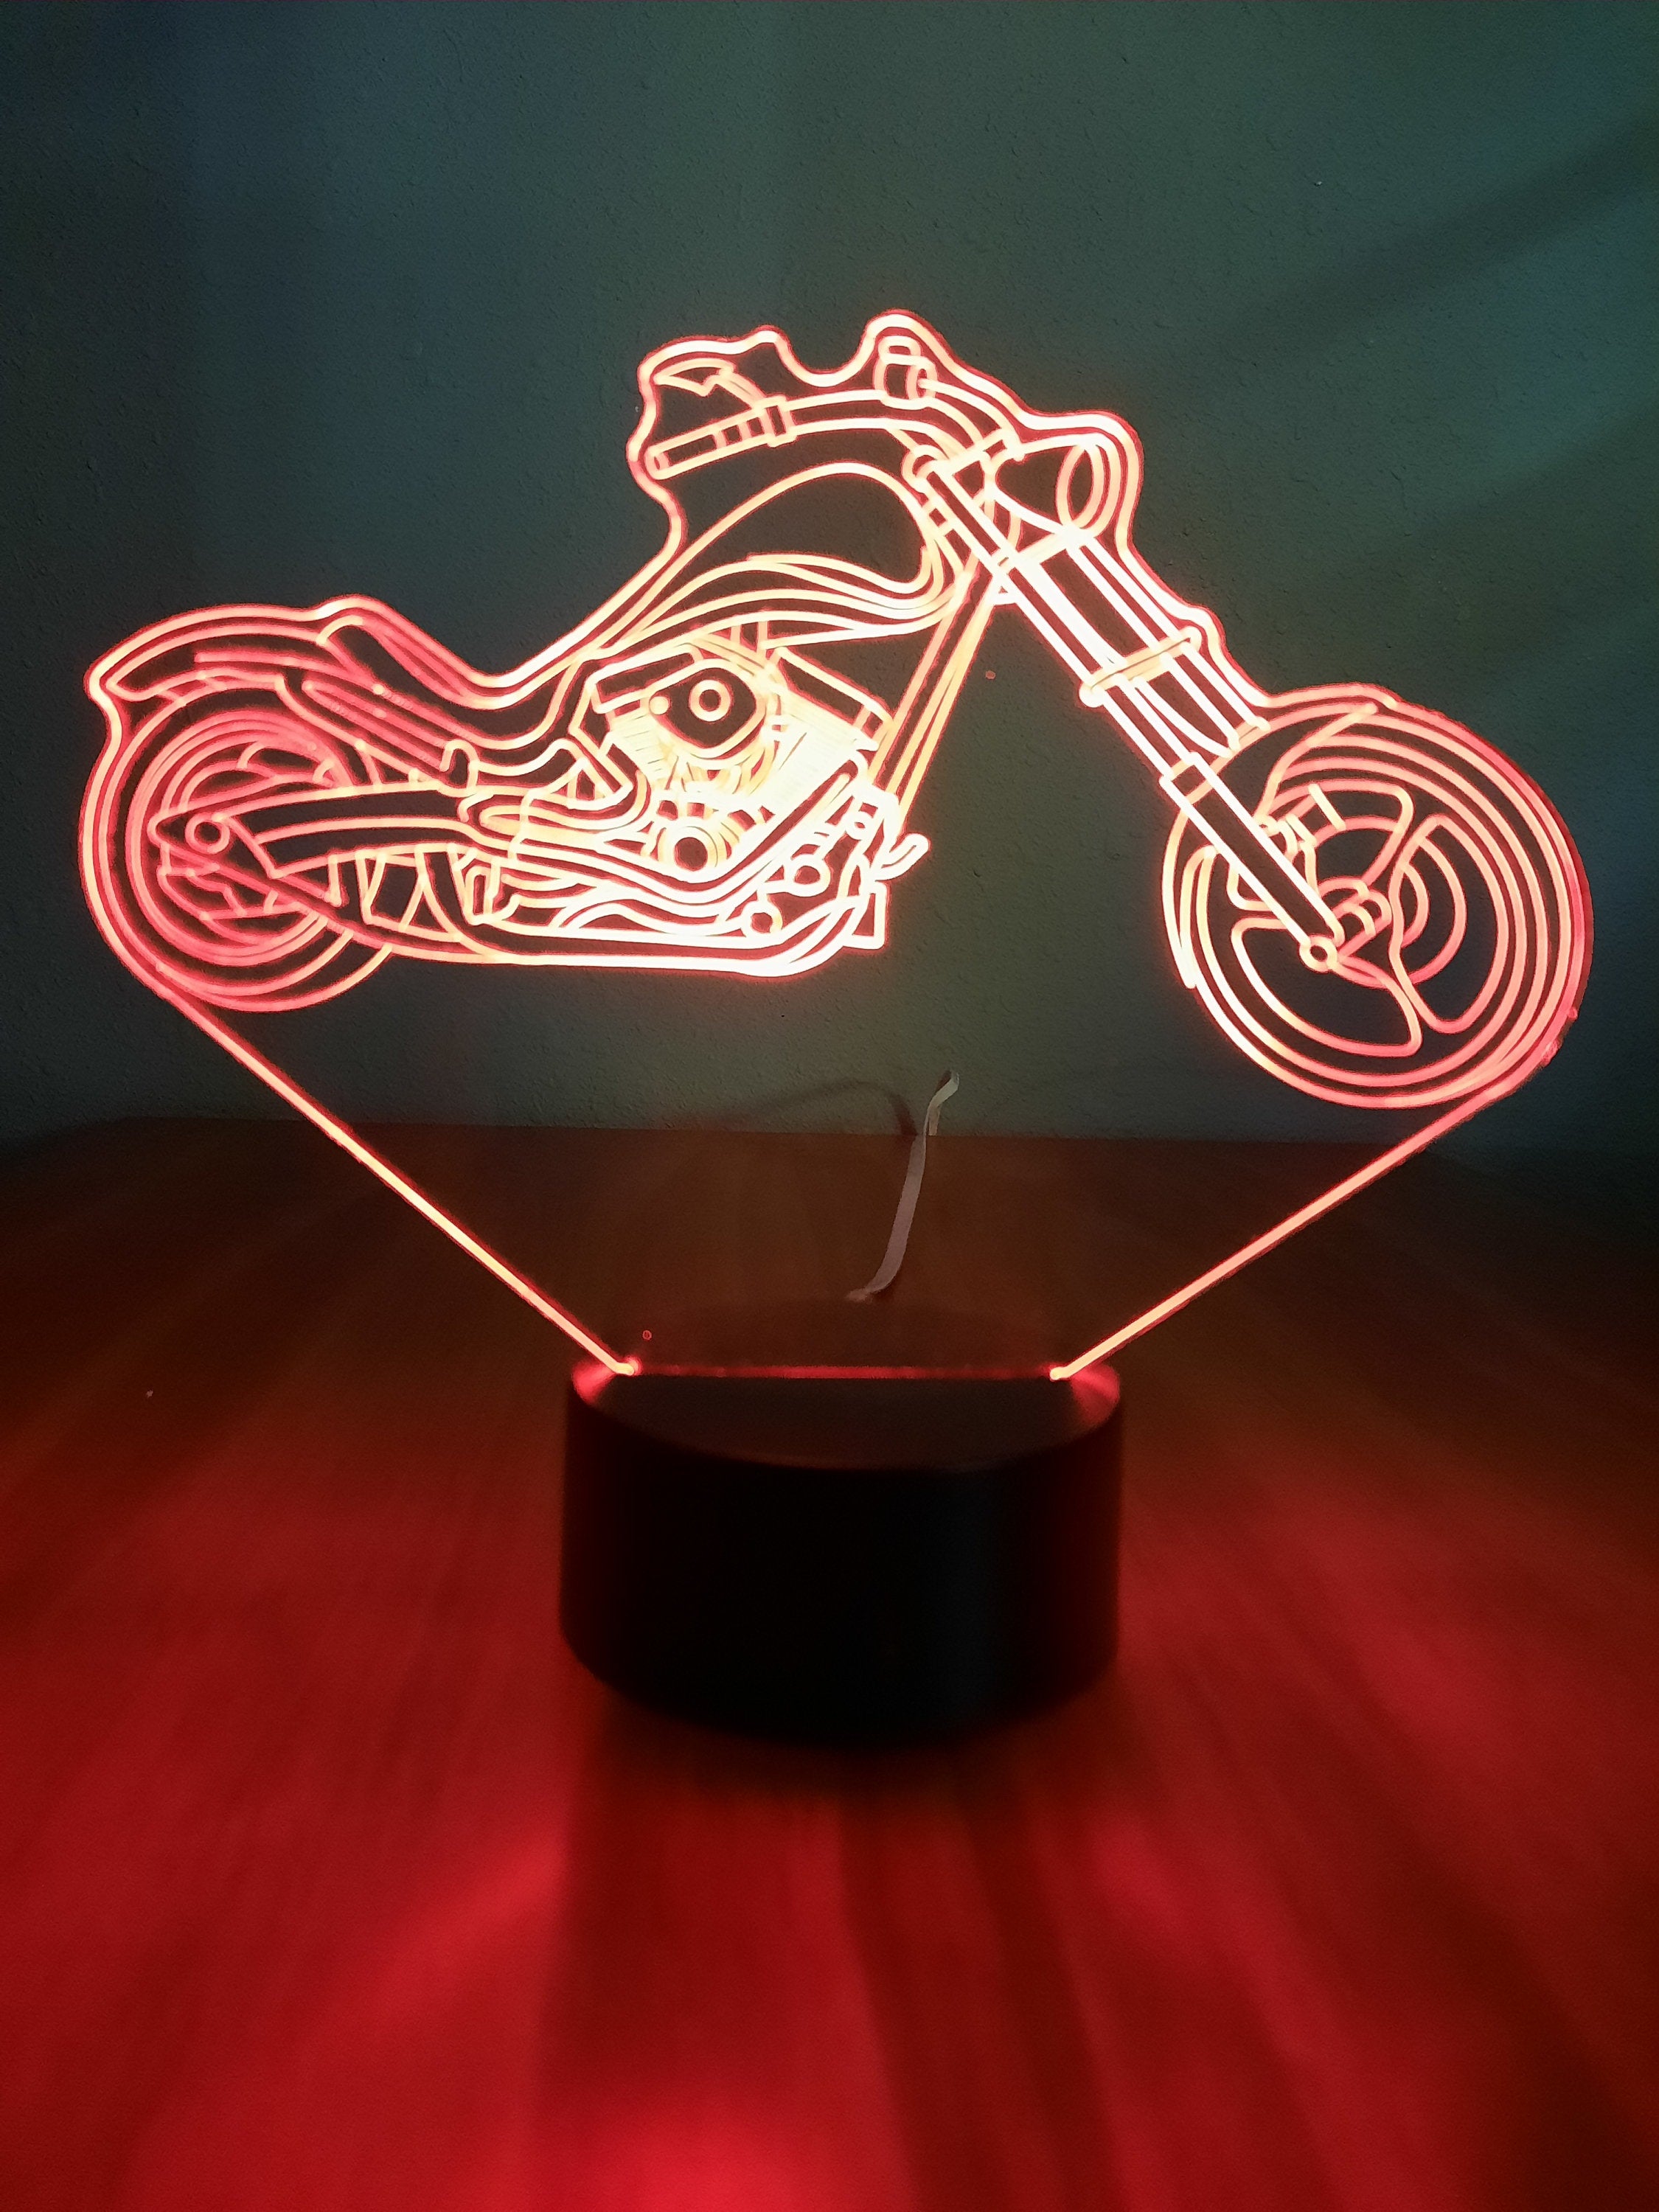 Awesome "Chopper Motorcycle" 3D LED Lamp (2671) - FREE SHIPPING!